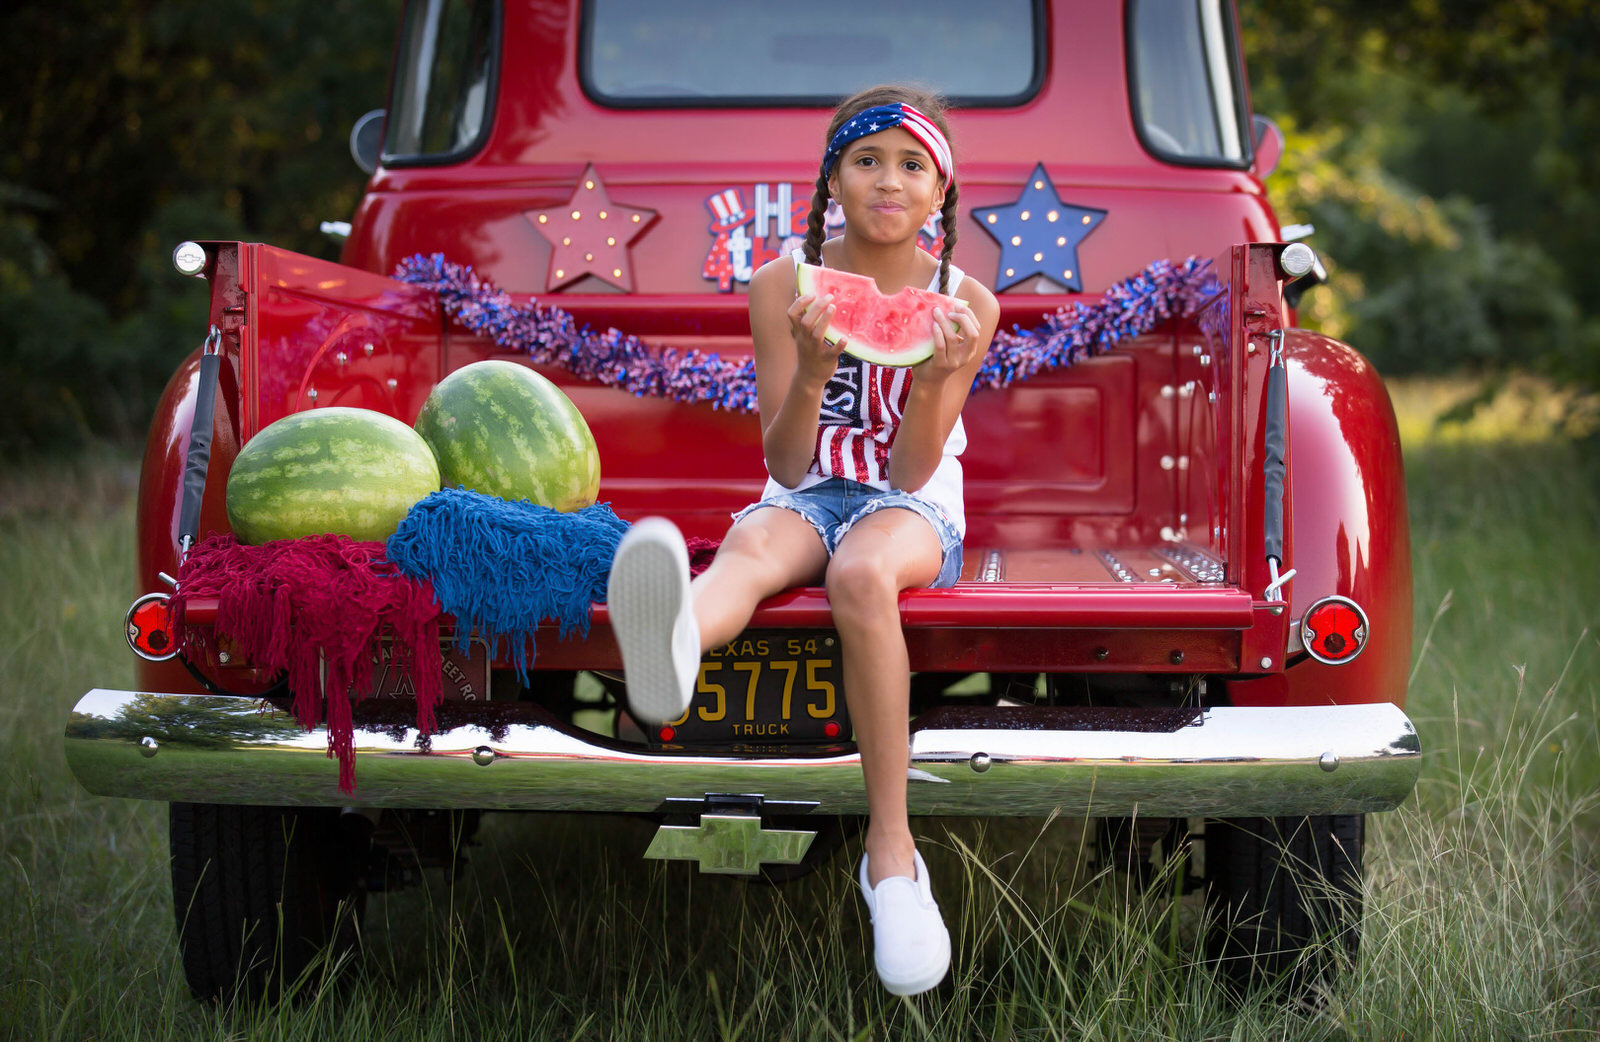 Girl in Vintage Red Truck eating watermelon 4th of July Photography